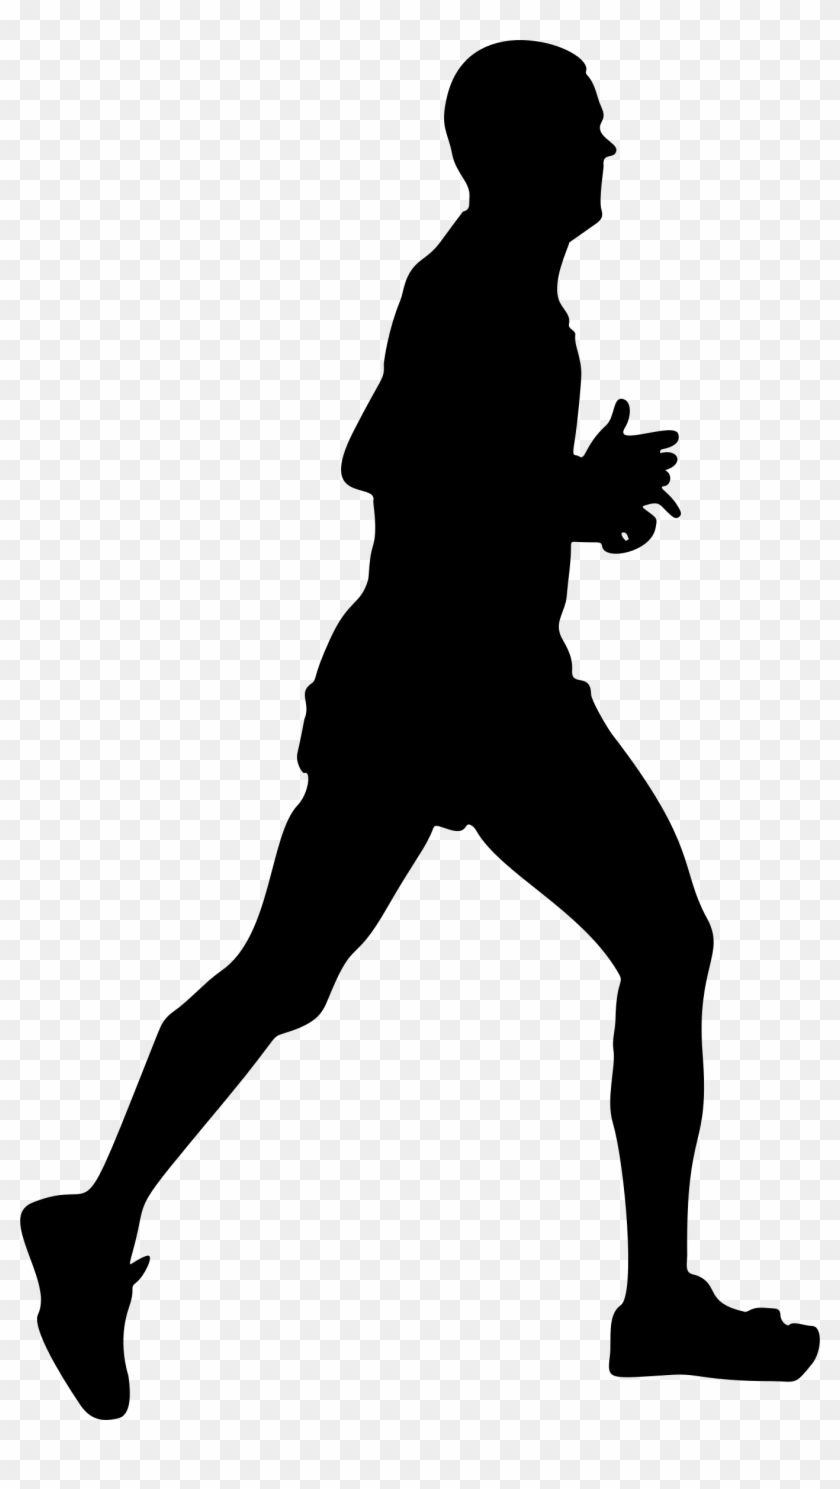 Runner Silhouette - Running Person Silhouette Png #144393